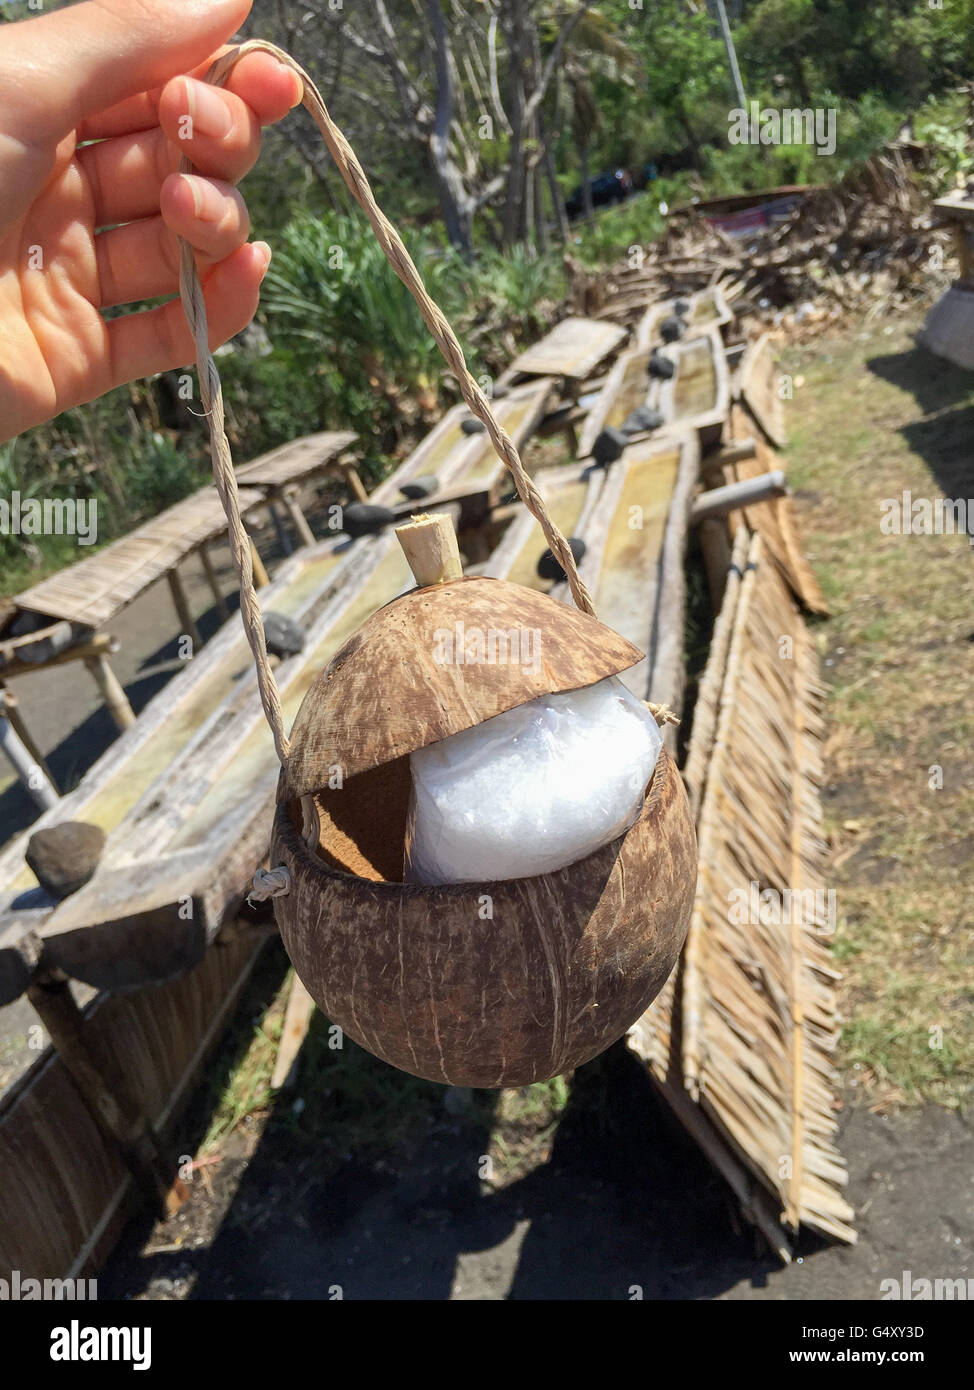 Indonesia, Bali, Klungkung, salt in coconut bowl Stock Photo